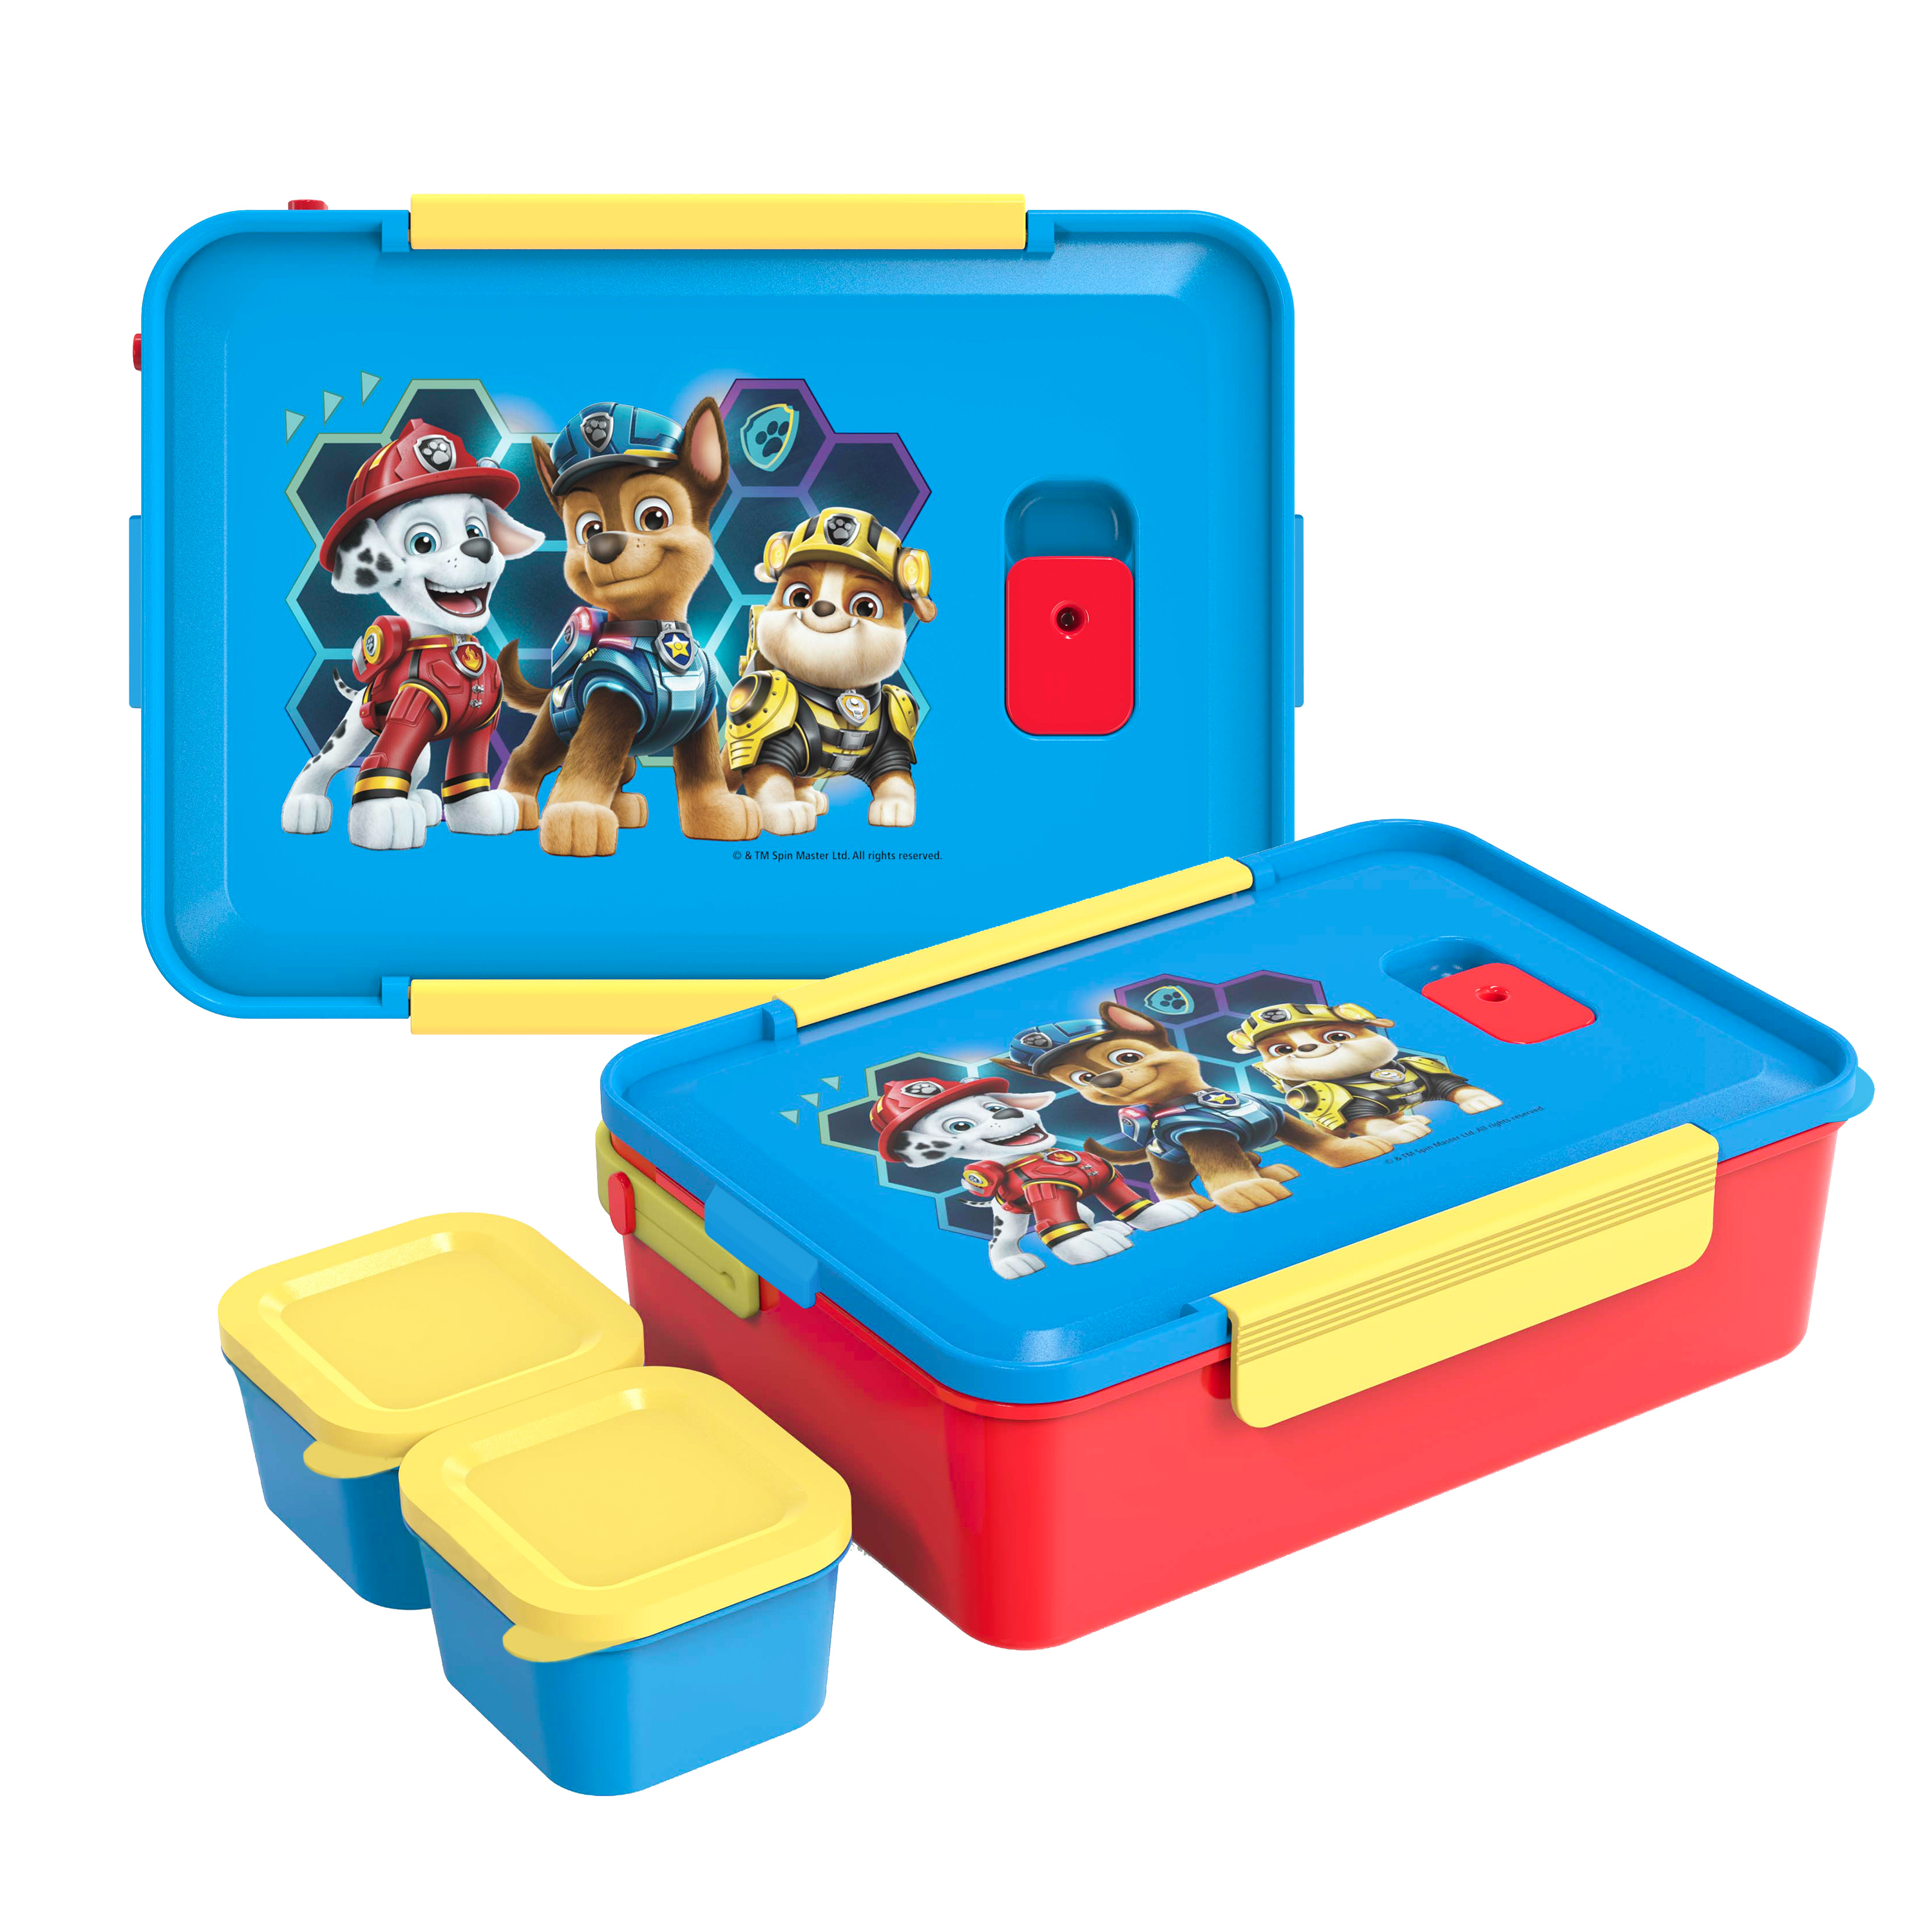 Paw Patrol Movie Reusable Divided Bento Box, Rubble, Marshall and Chase, 3-piece set slideshow image 1